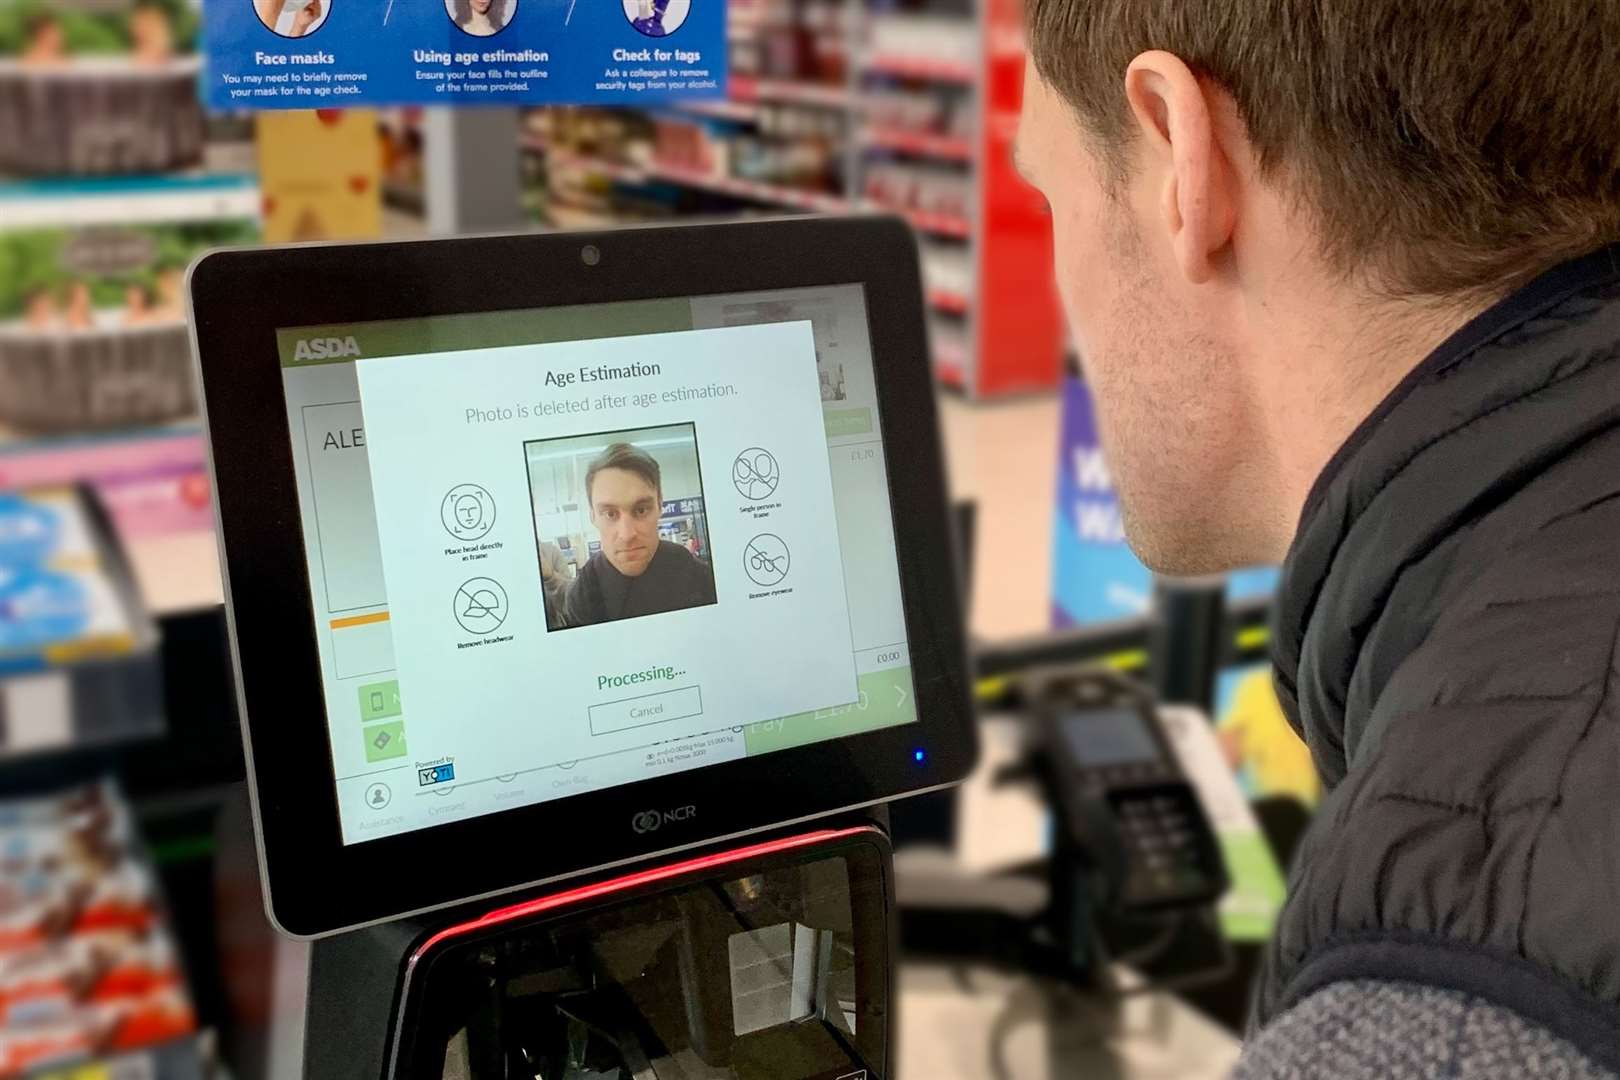 Asda to trial face scanning technology to verify the age of people buying alcohol